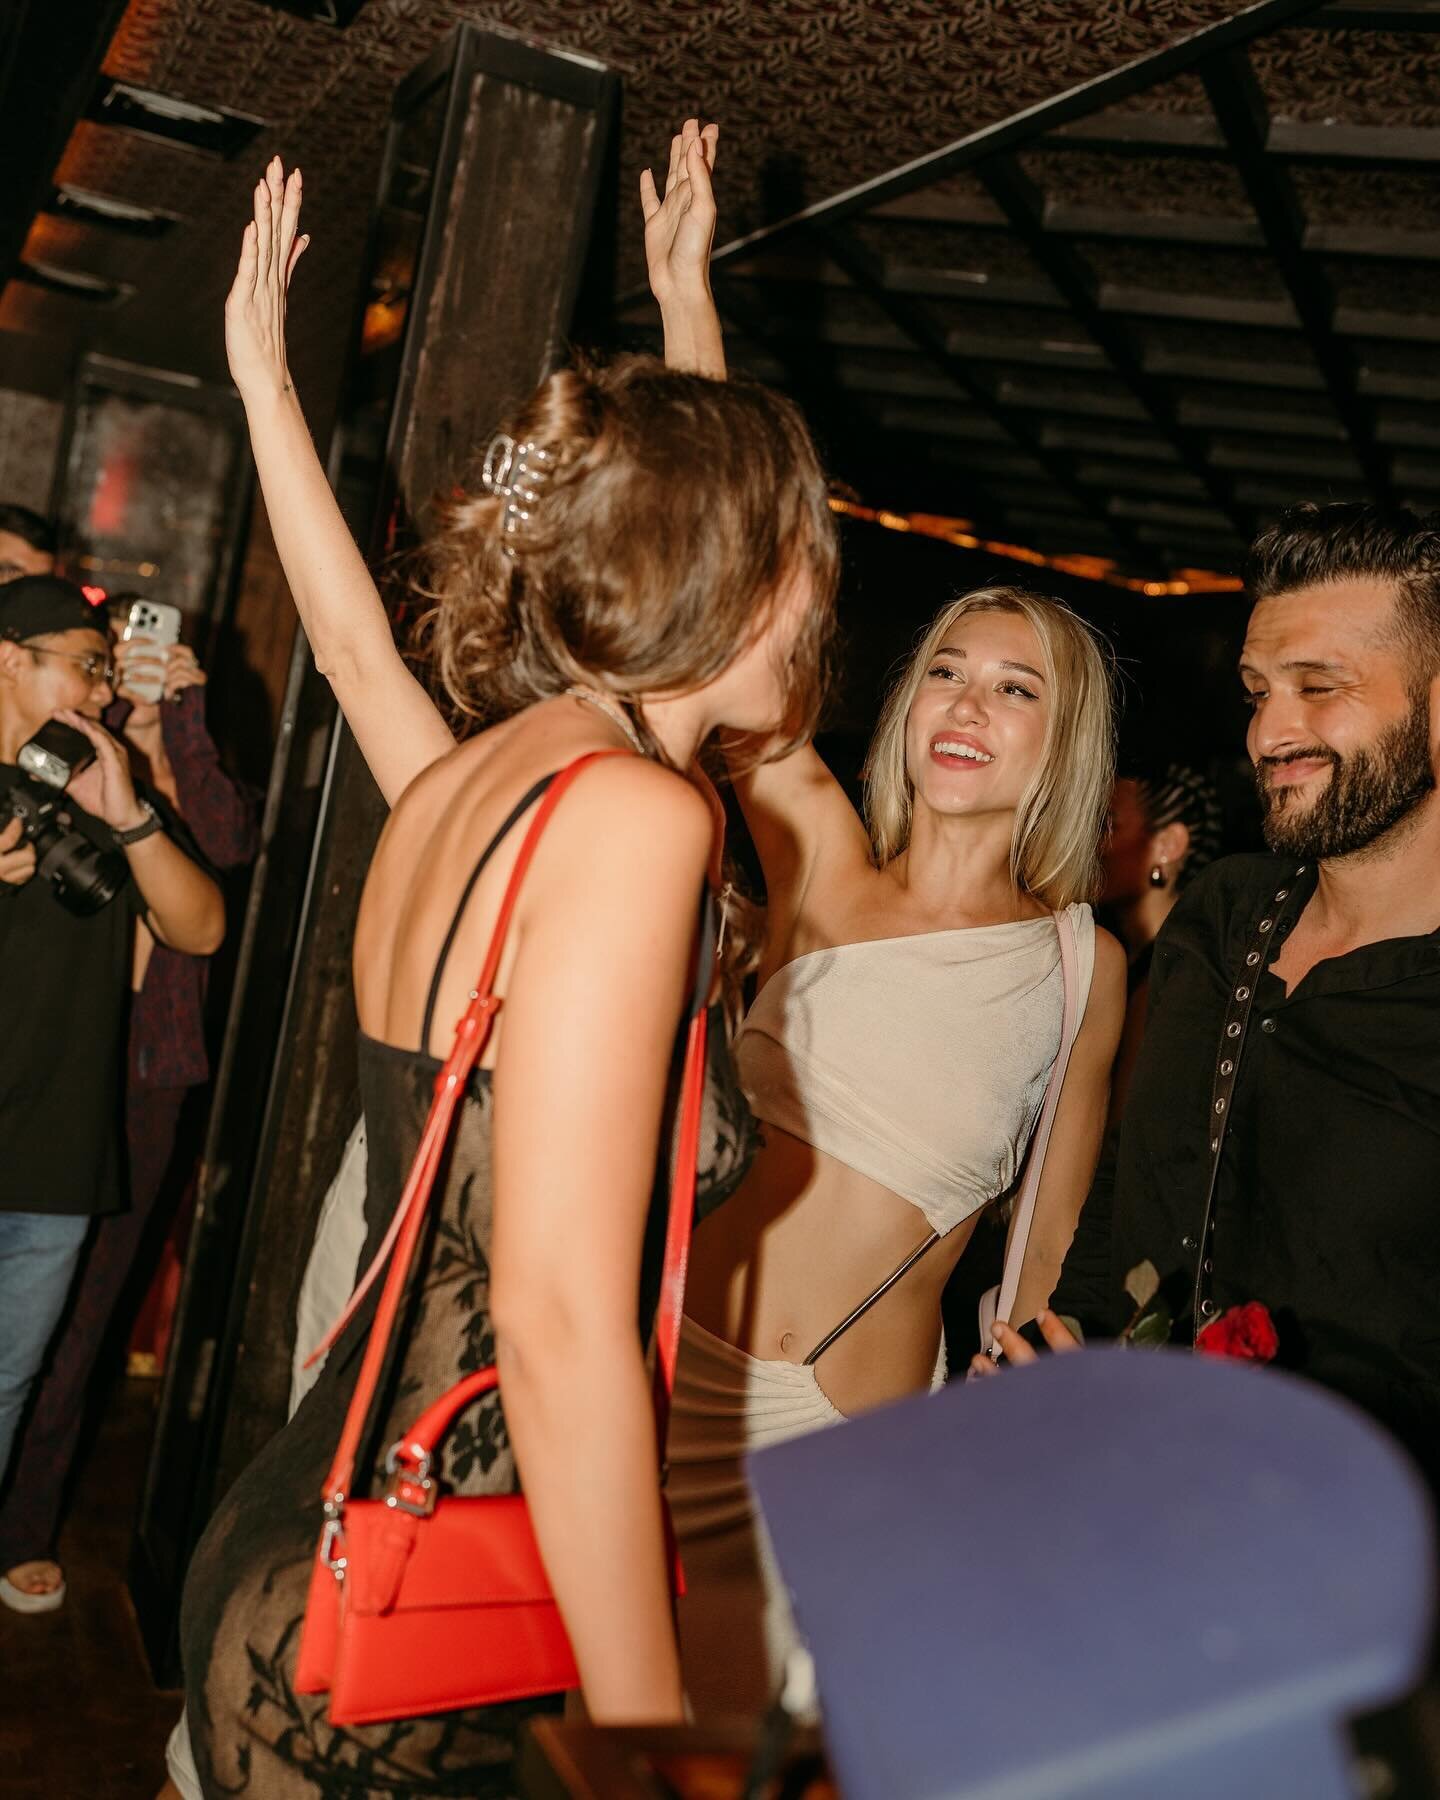 Join the undercover fun at Mamasita&rsquo;s speakeasy, where the password is laughter! 

For reservations call us or message us on WhatsApp at +62 811 388341
www.heymamasita.com

#heymamasita 
#bali 
#BaliDaily
#VisitBali
#balinightlife